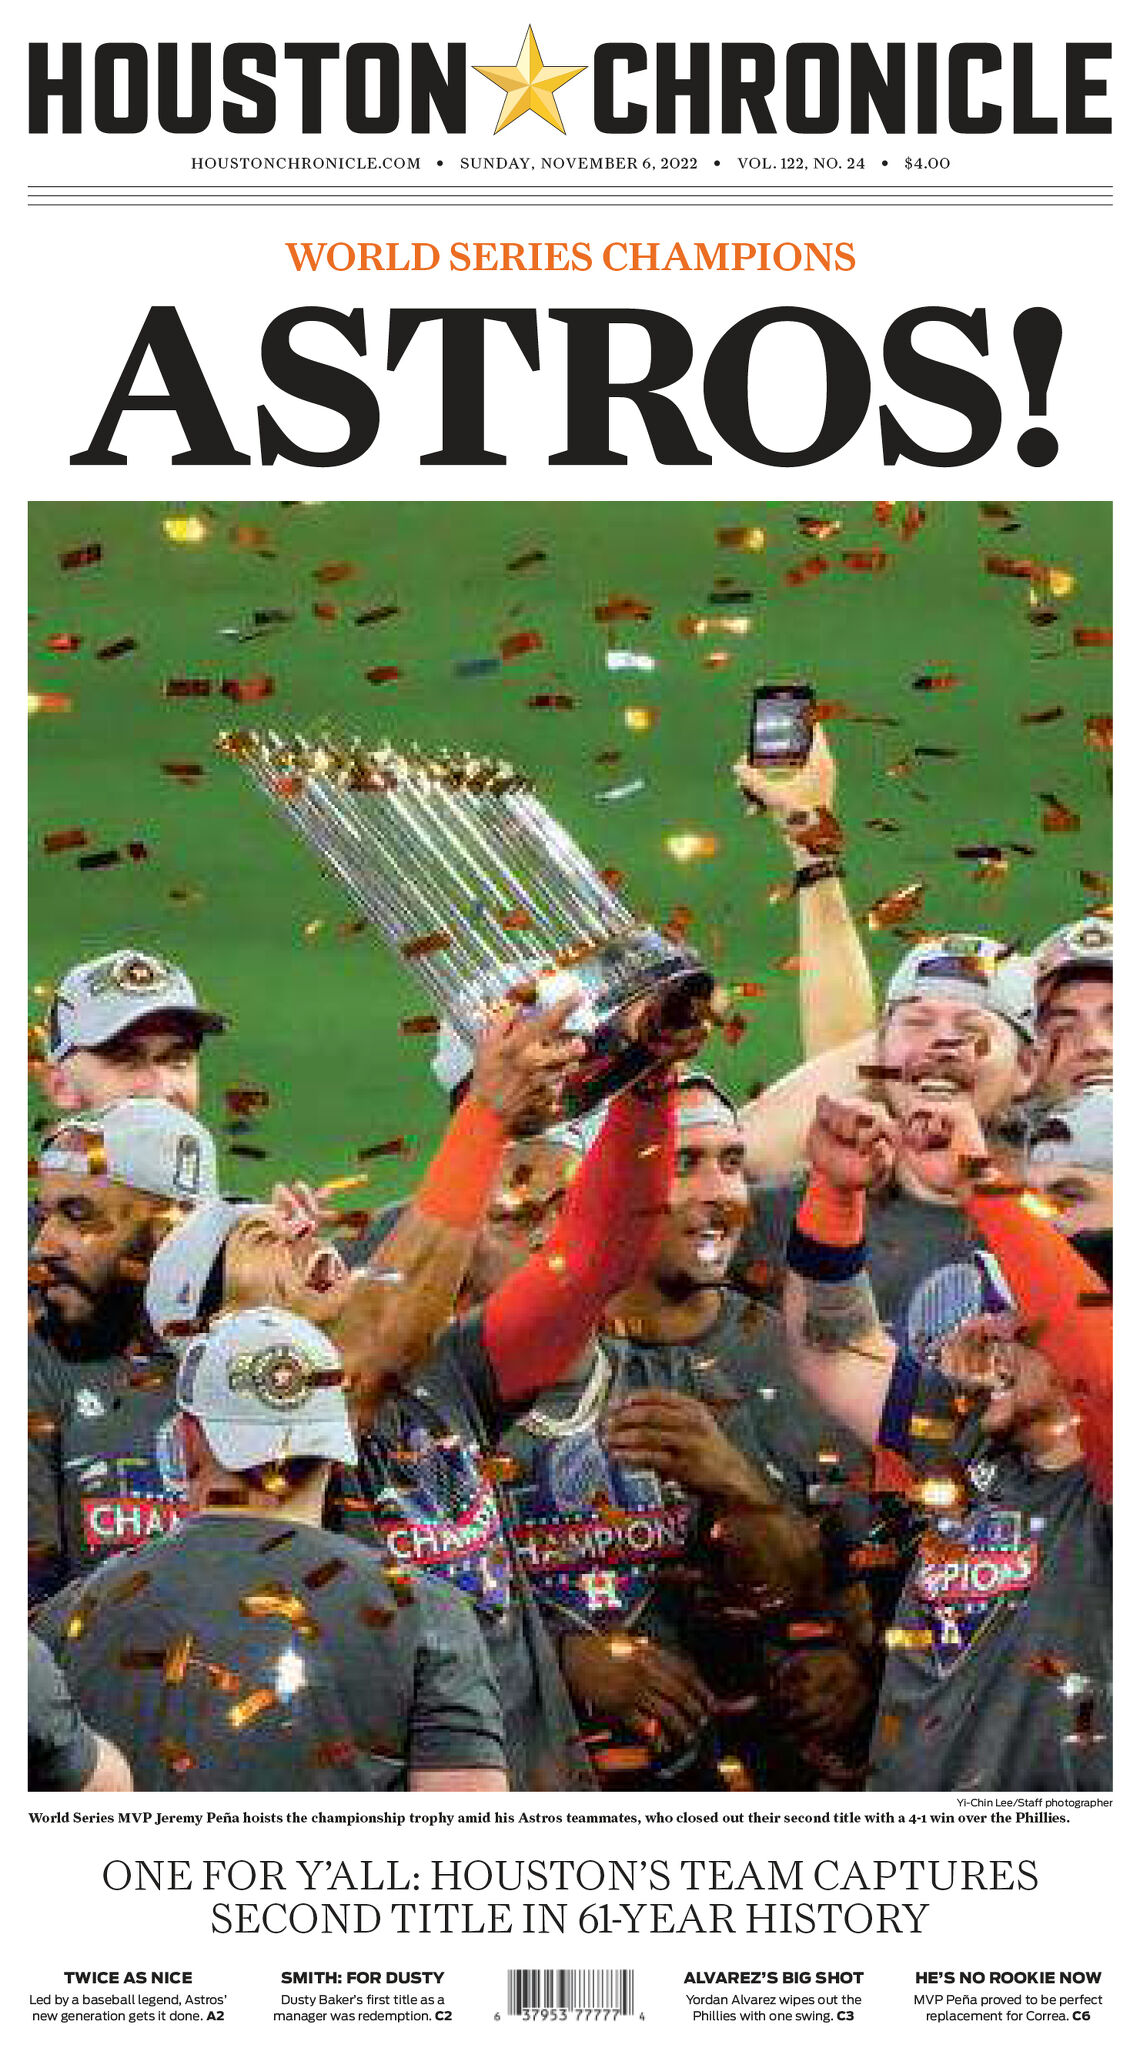 Astros World Series How to buy special edition reprints